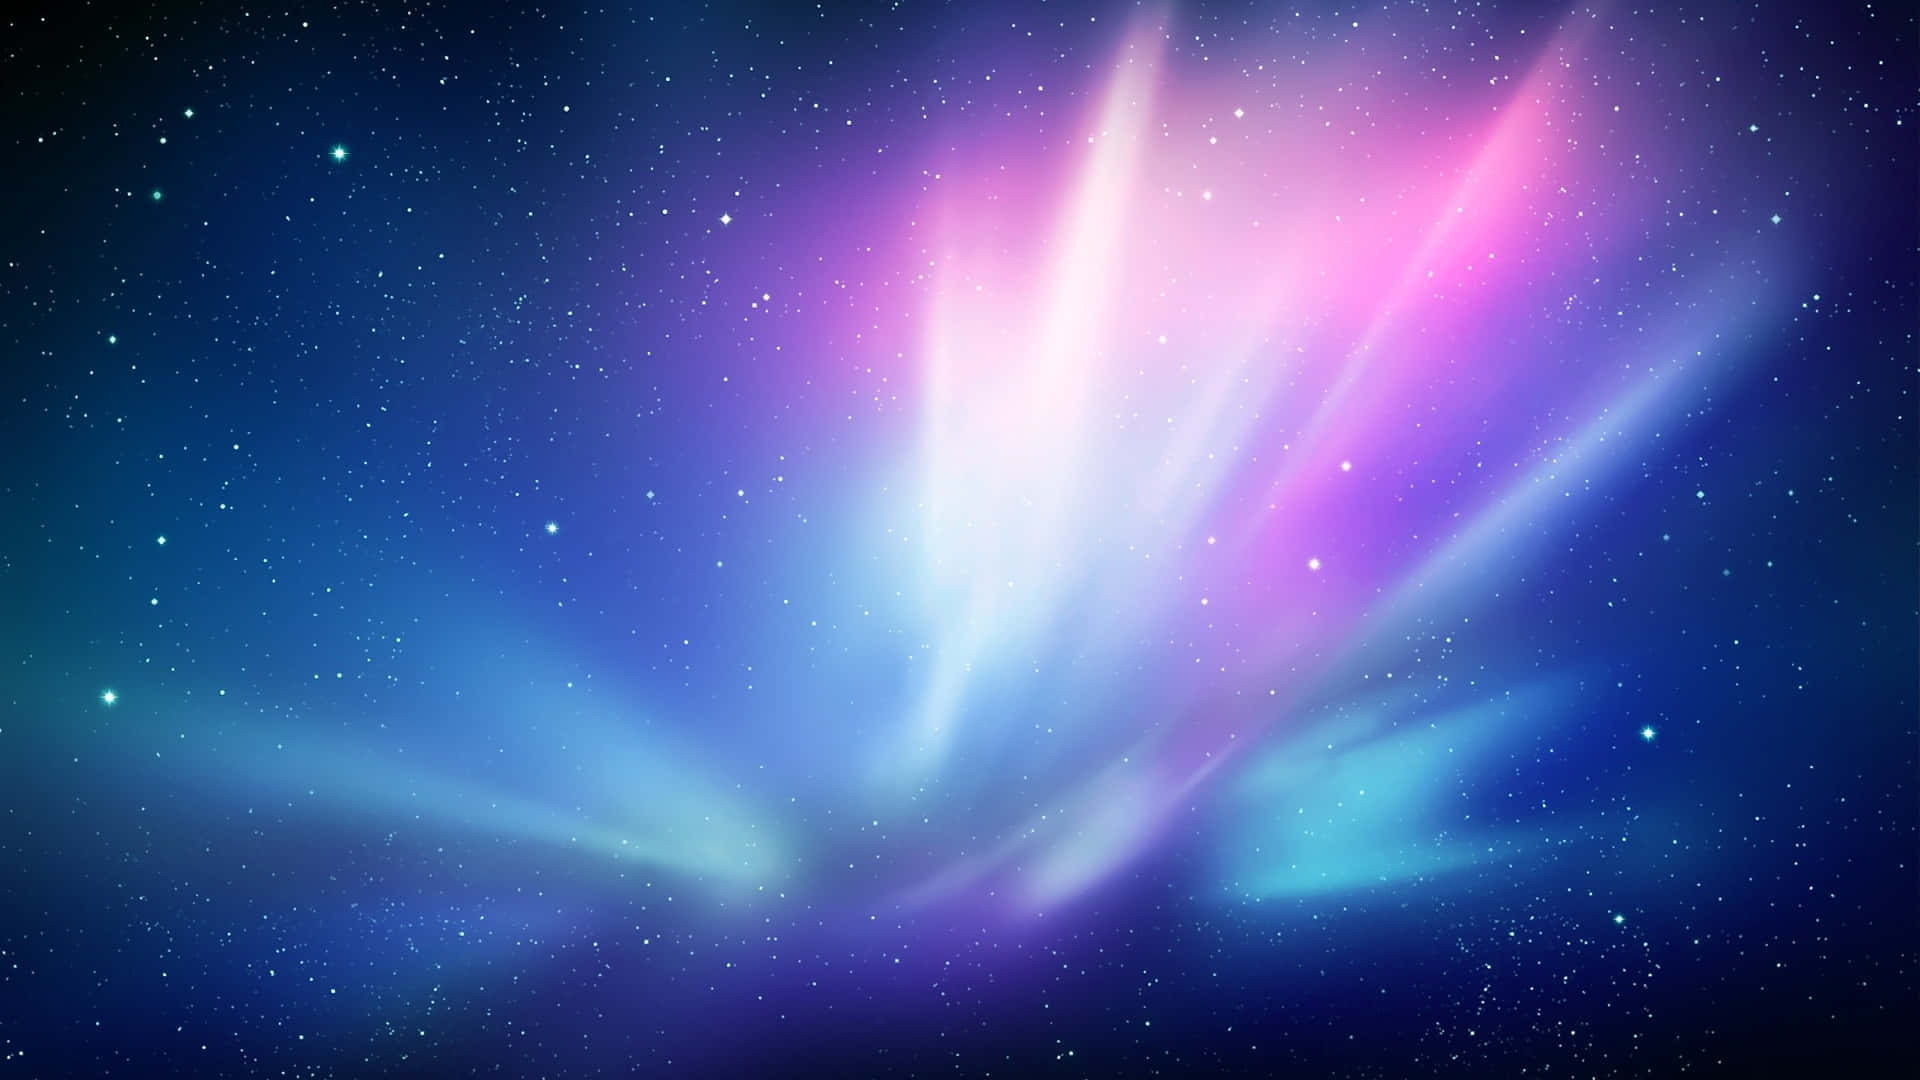 Colorful Desktop with Blue and Purple Wallpaper